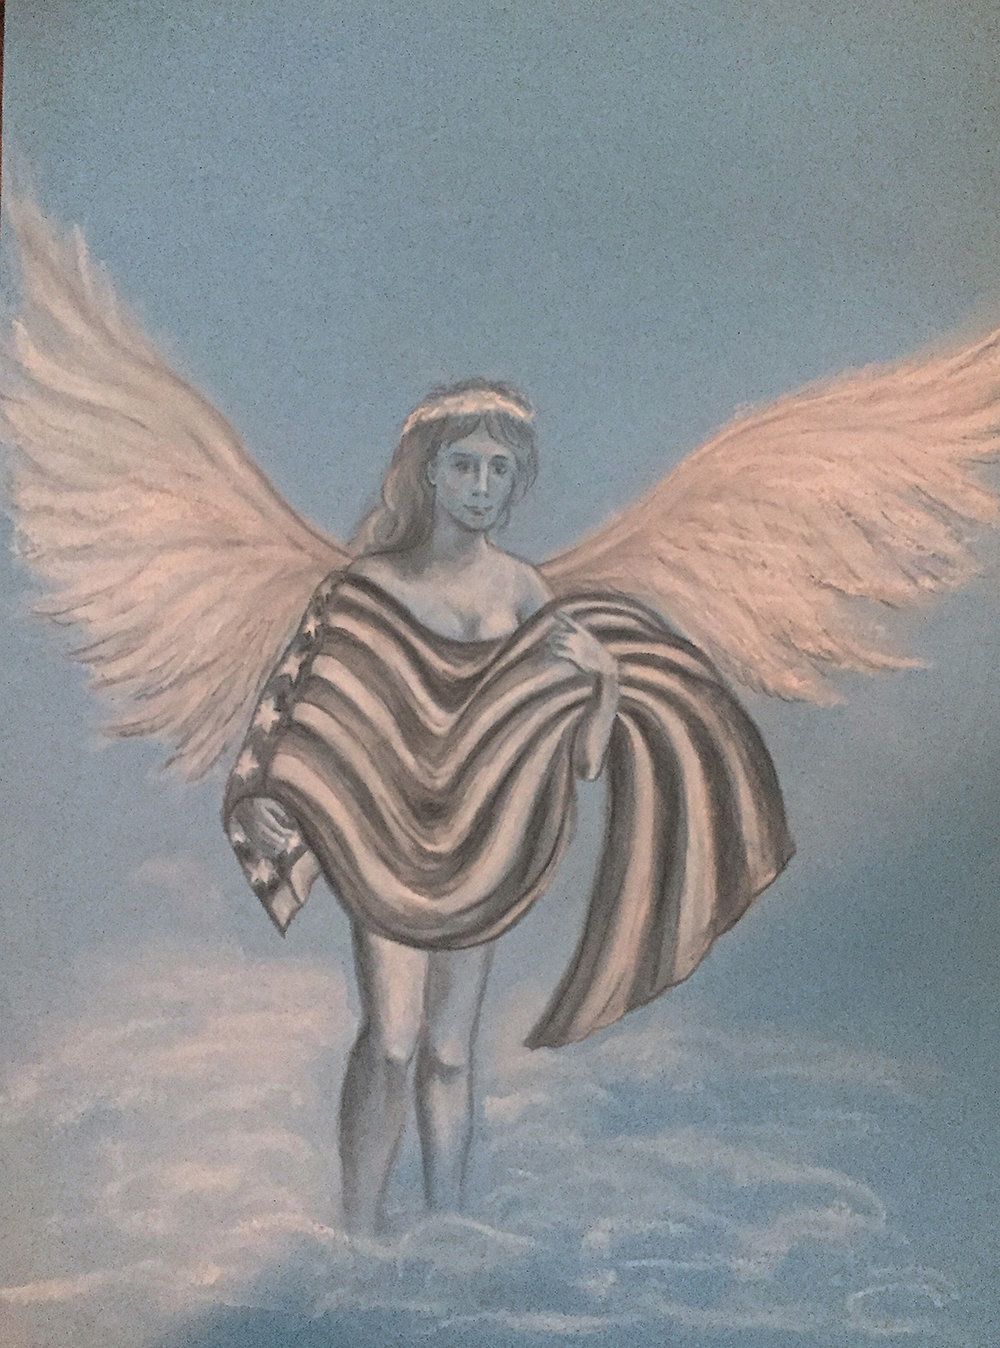 Jania Vanderwerff, "Refuge." Pencil and pastel on blue paper, 14 in. by 11 in. 